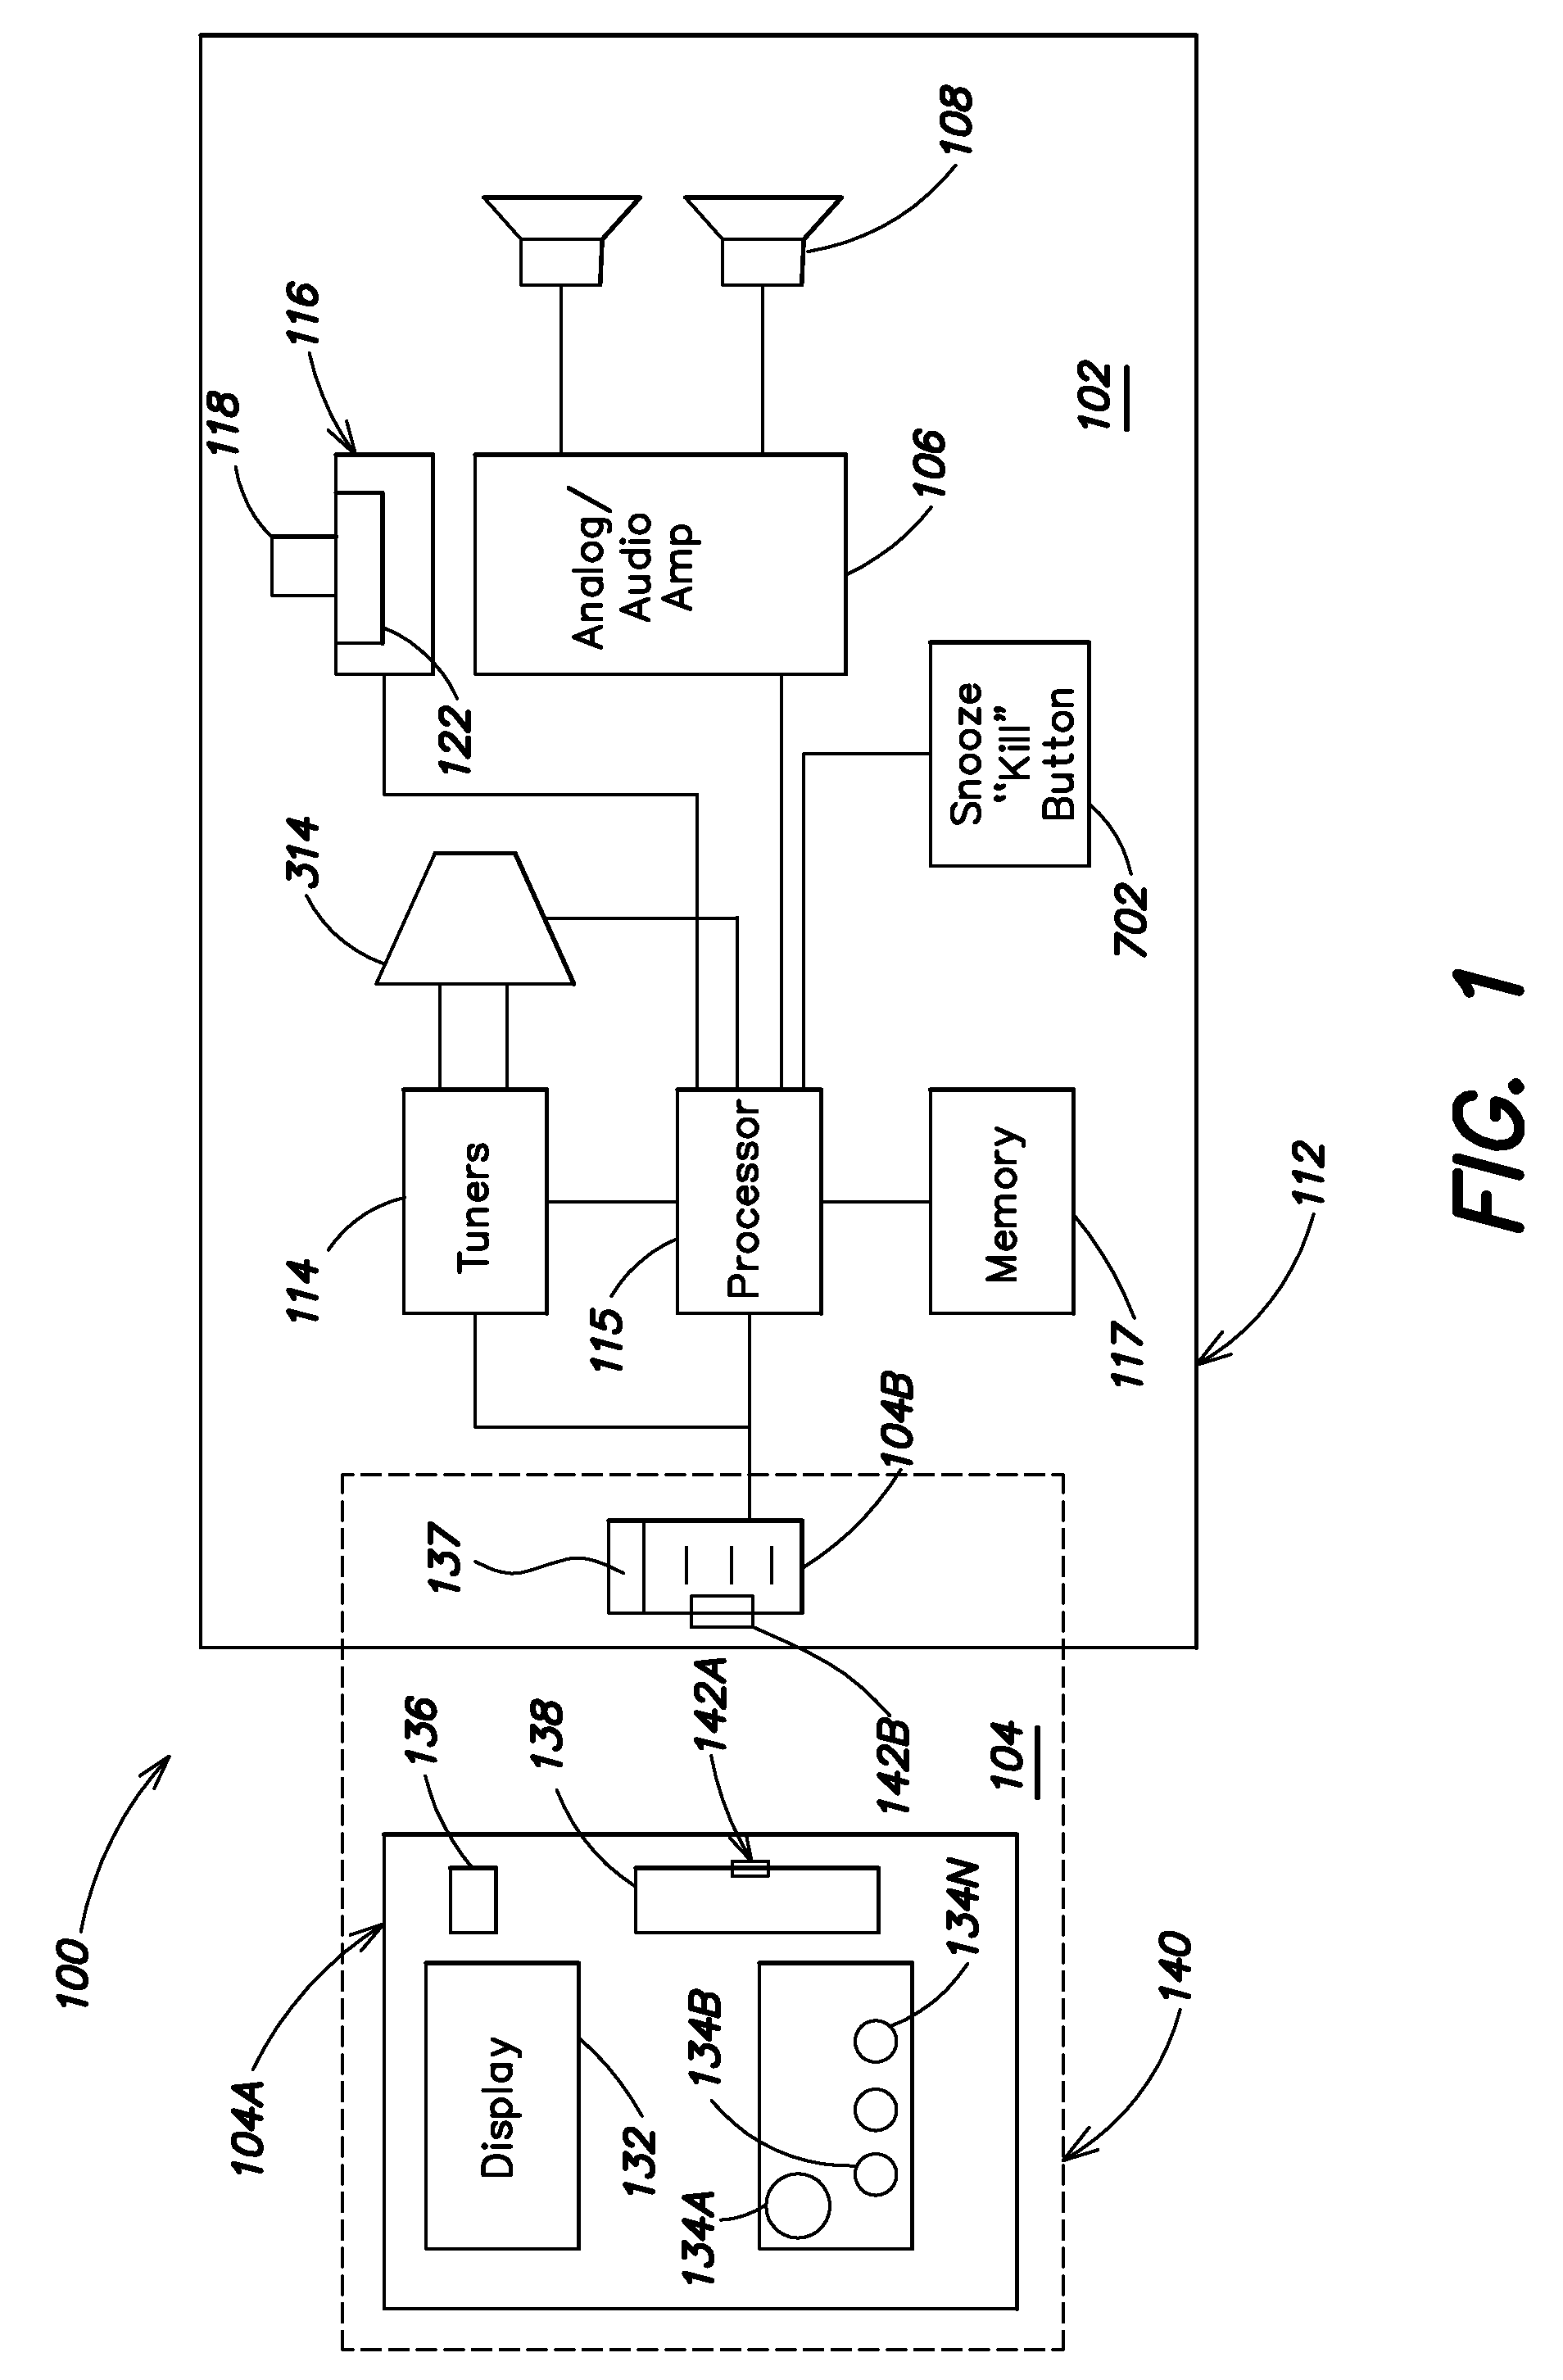 Entertainment system with unified content selection